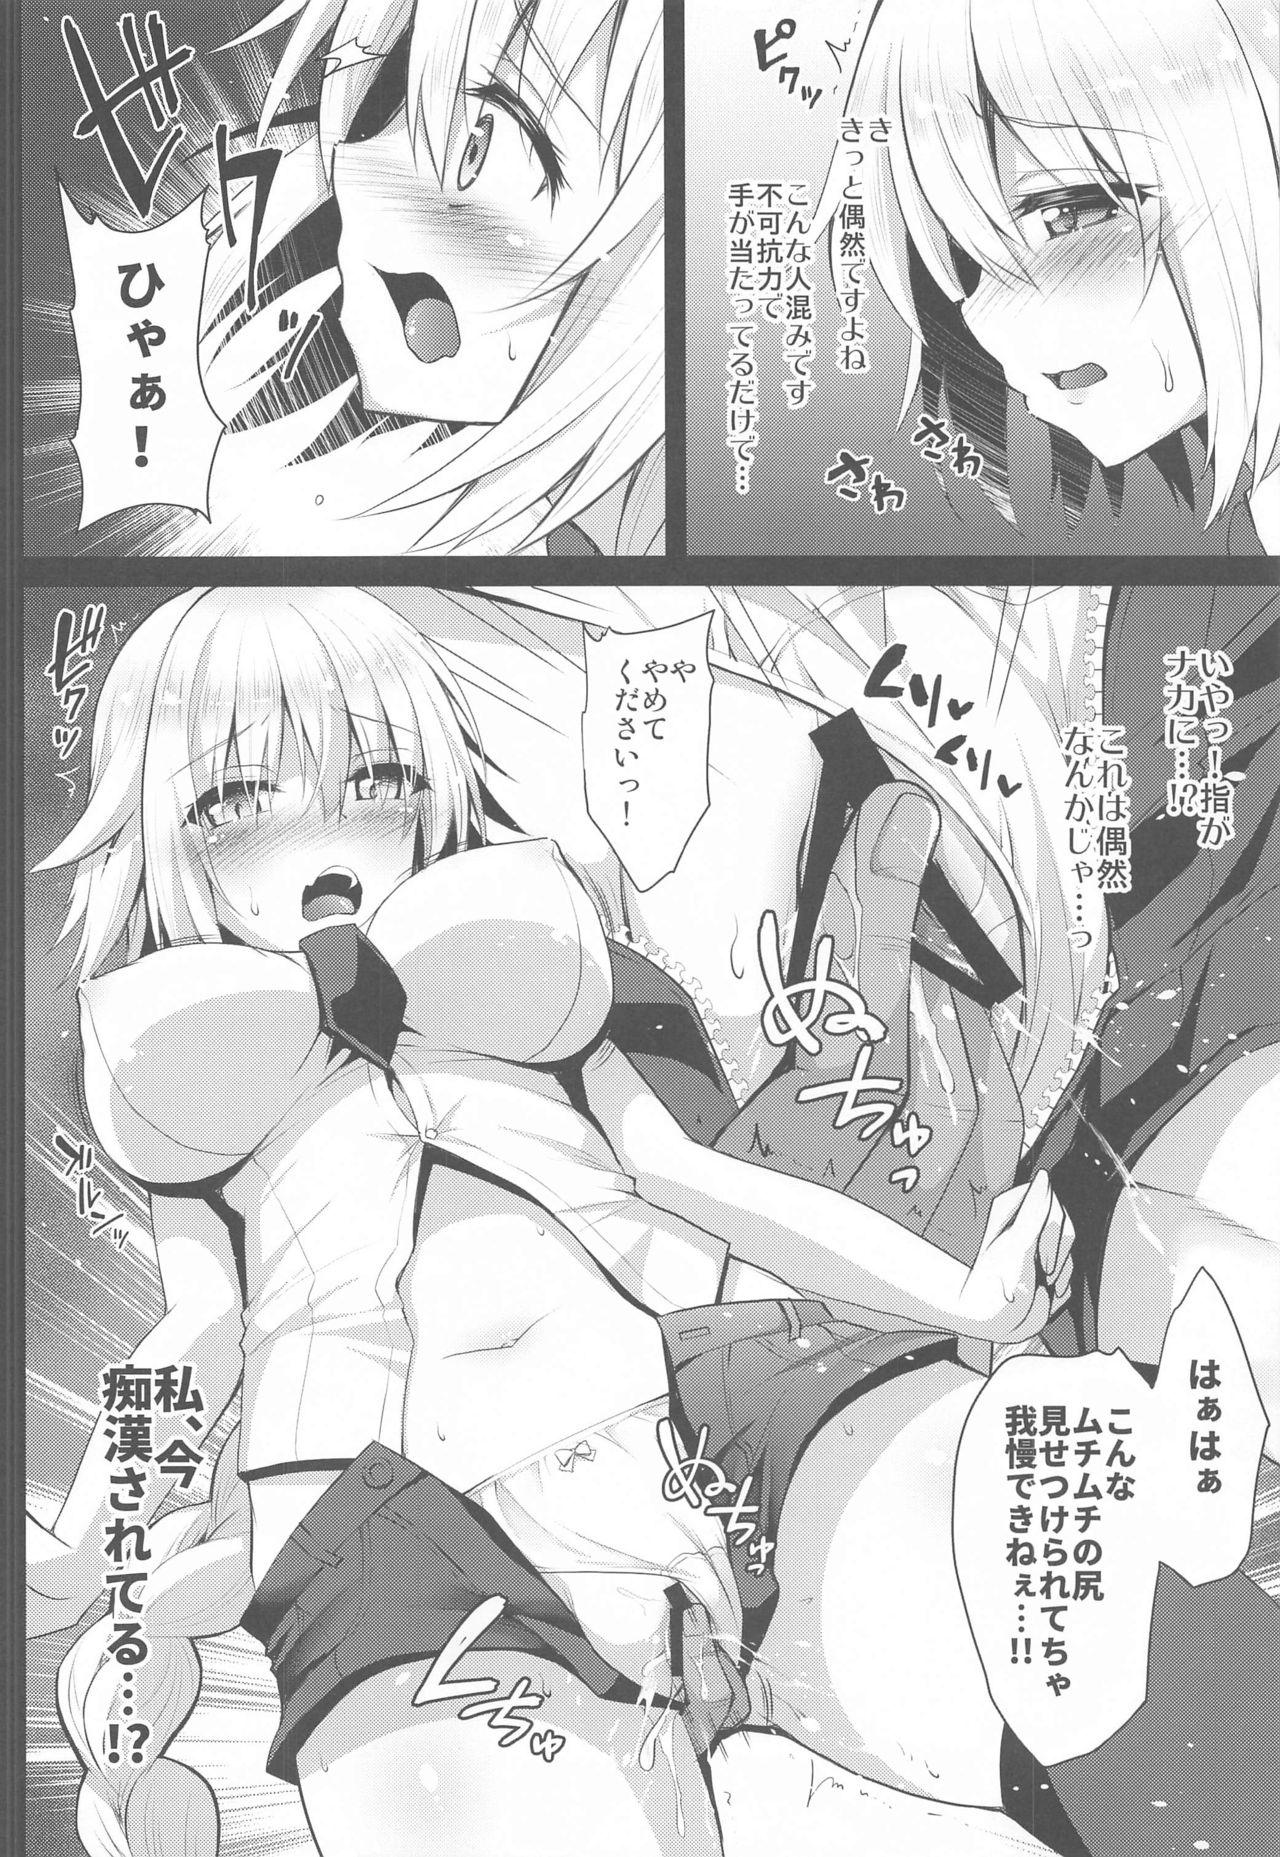 Exotic Chikan Densha Jeanne - Fate grand order Fist - Page 5